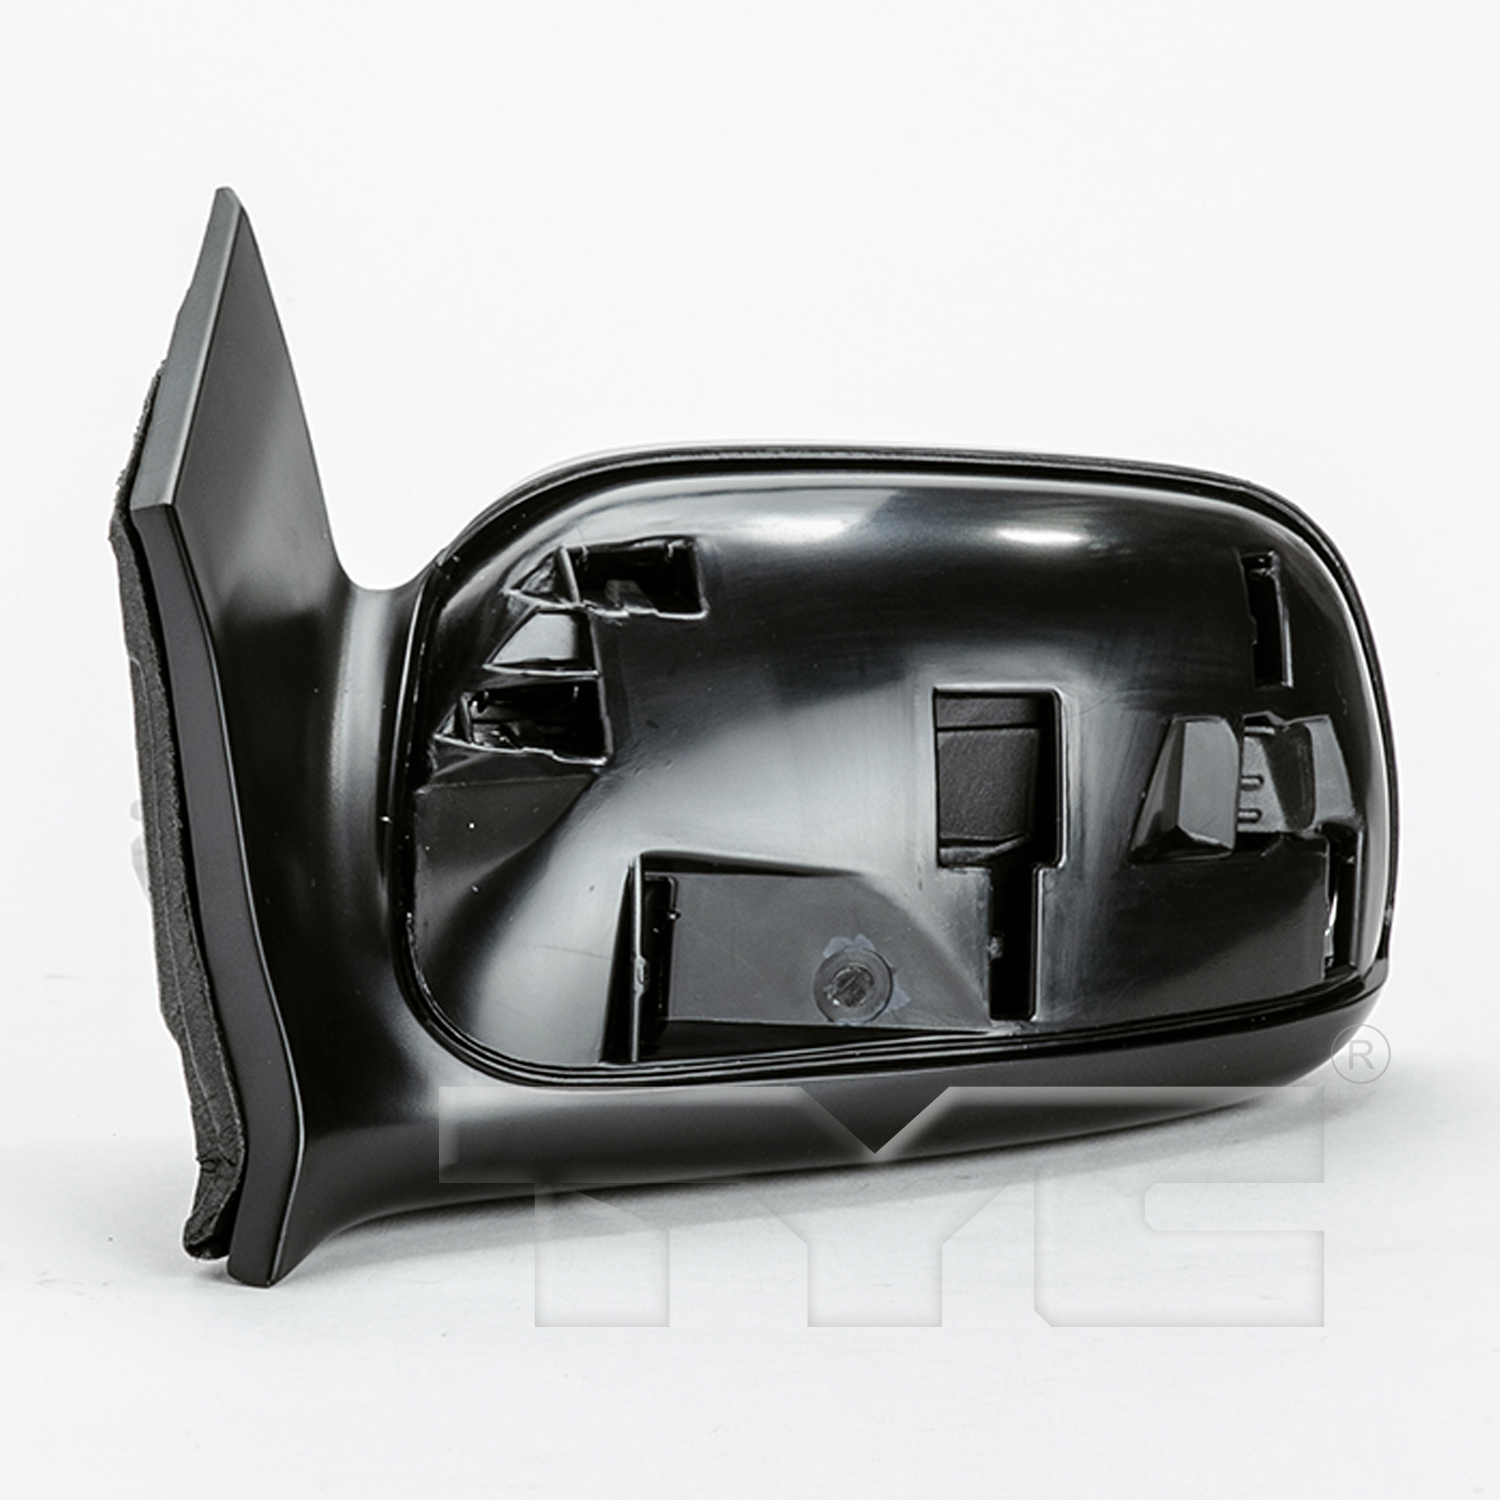 Aftermarket MIRRORS for HONDA - CIVIC, CIVIC,06-08,LT Mirror outside rear view